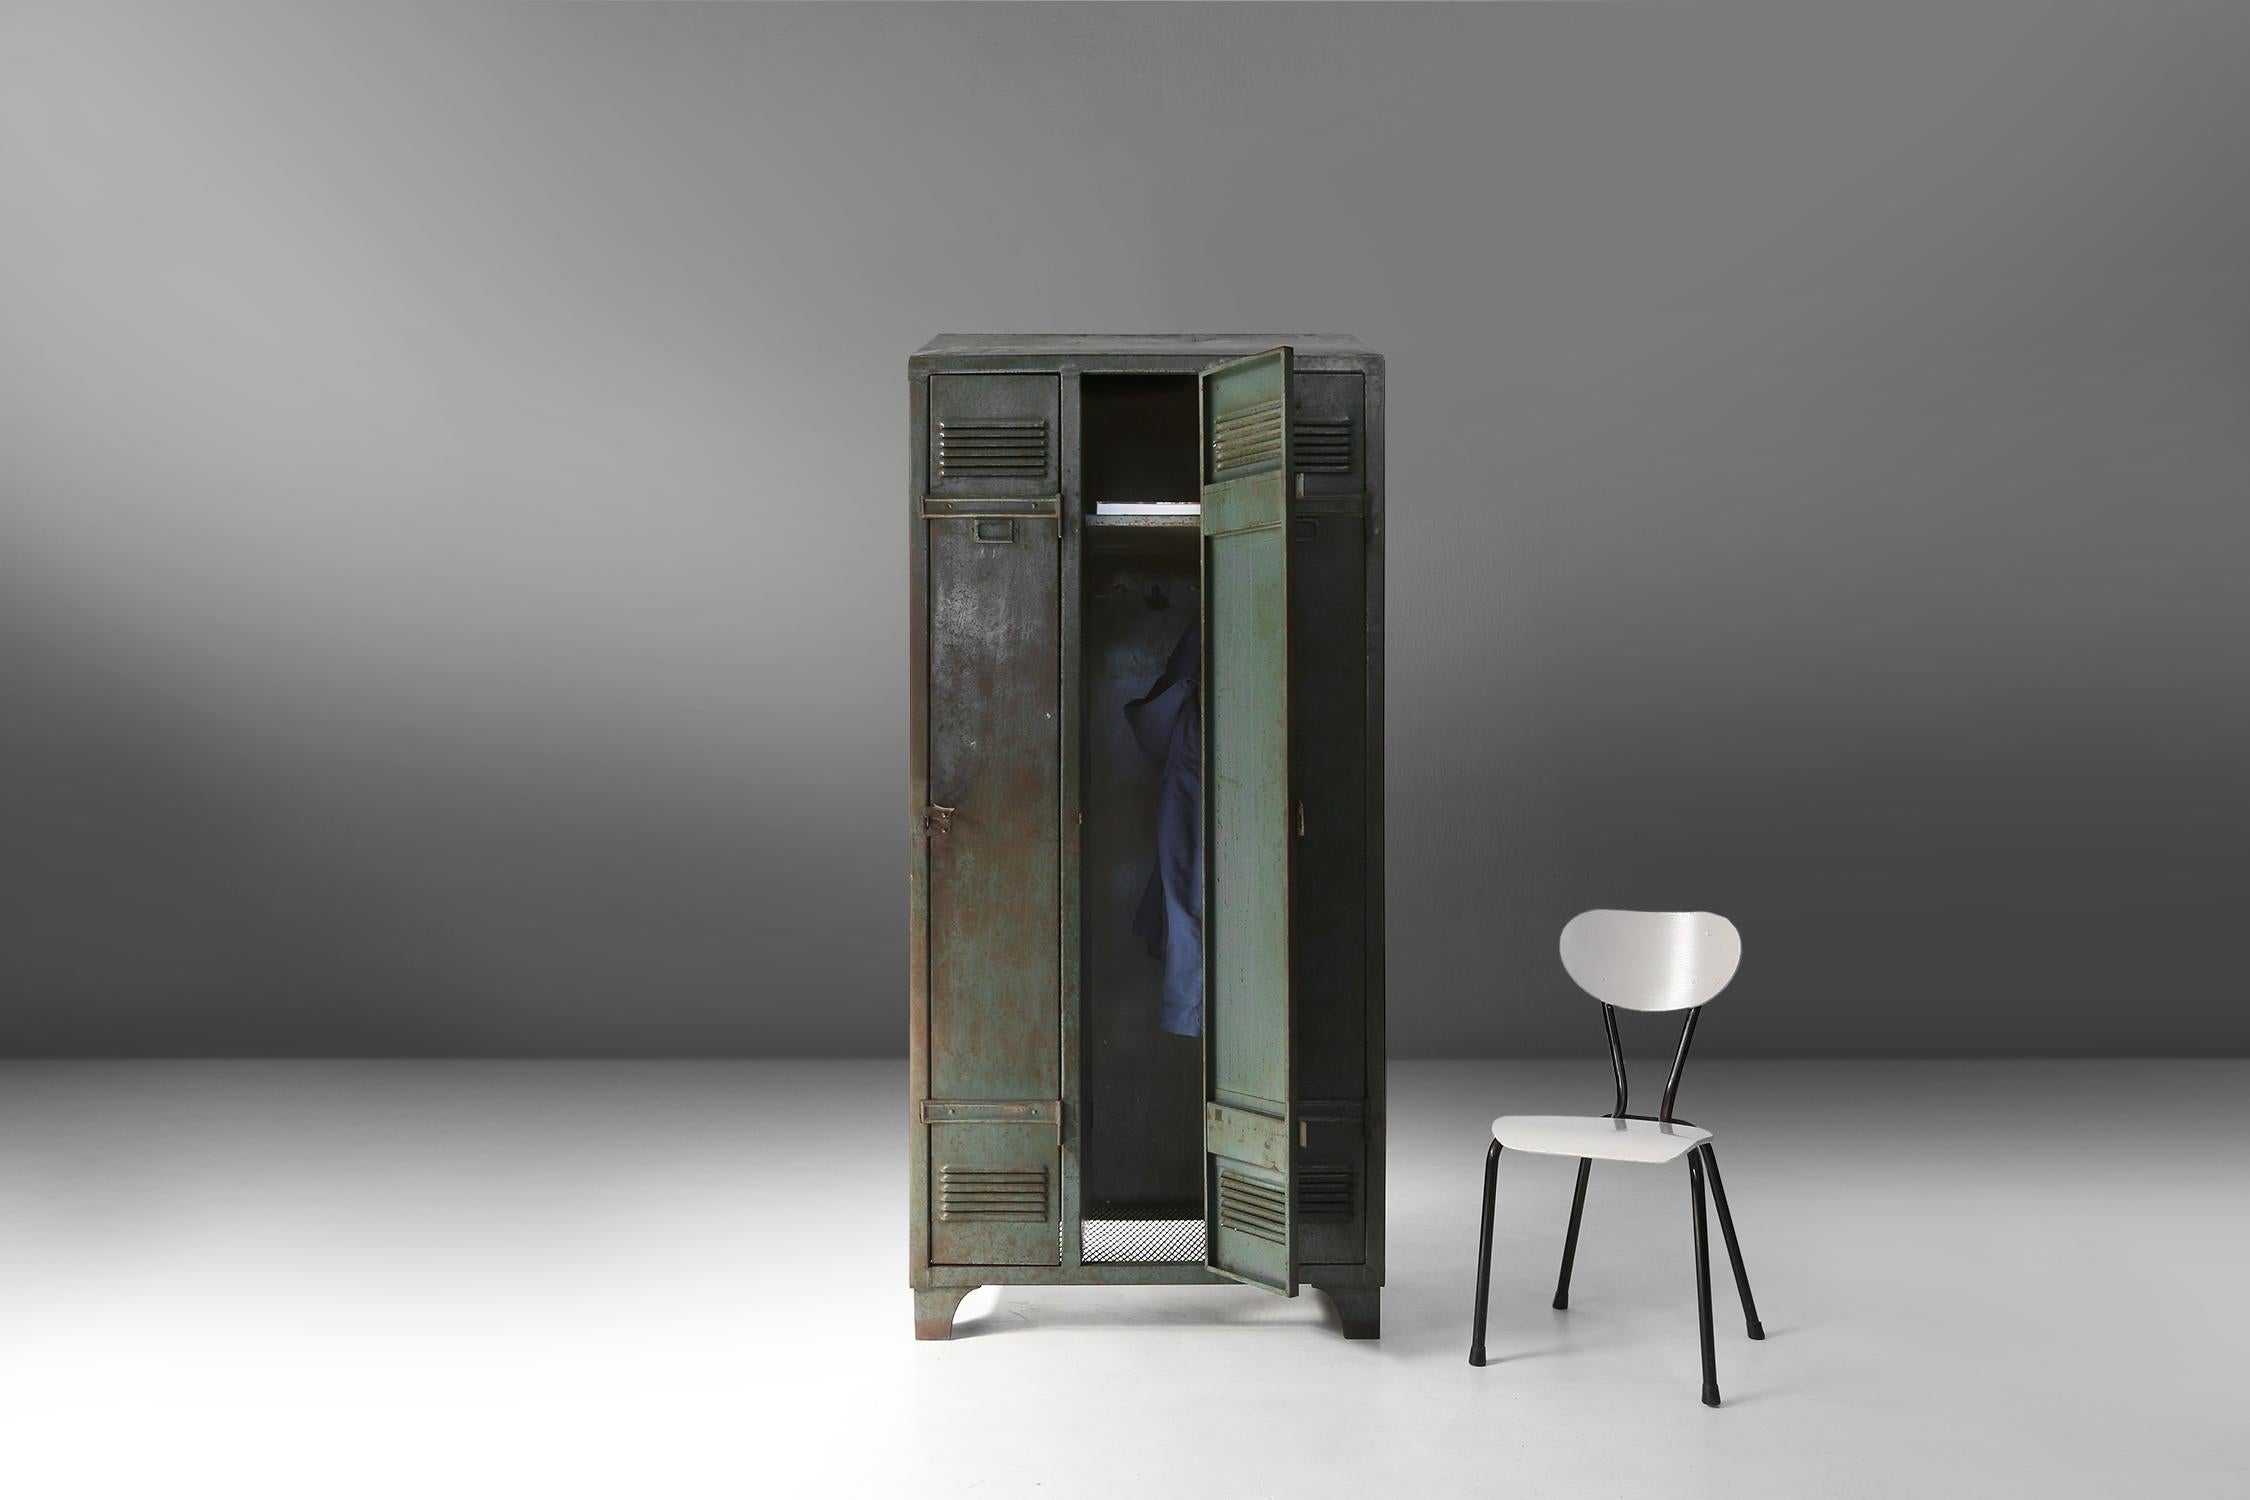 Made around 1910 in France, this locker has three compartments to store all your belongings. The locker has a dark green-grey colour that goes perfectly with any style.

The locker also has a rustic and weathered look that is a testament to its